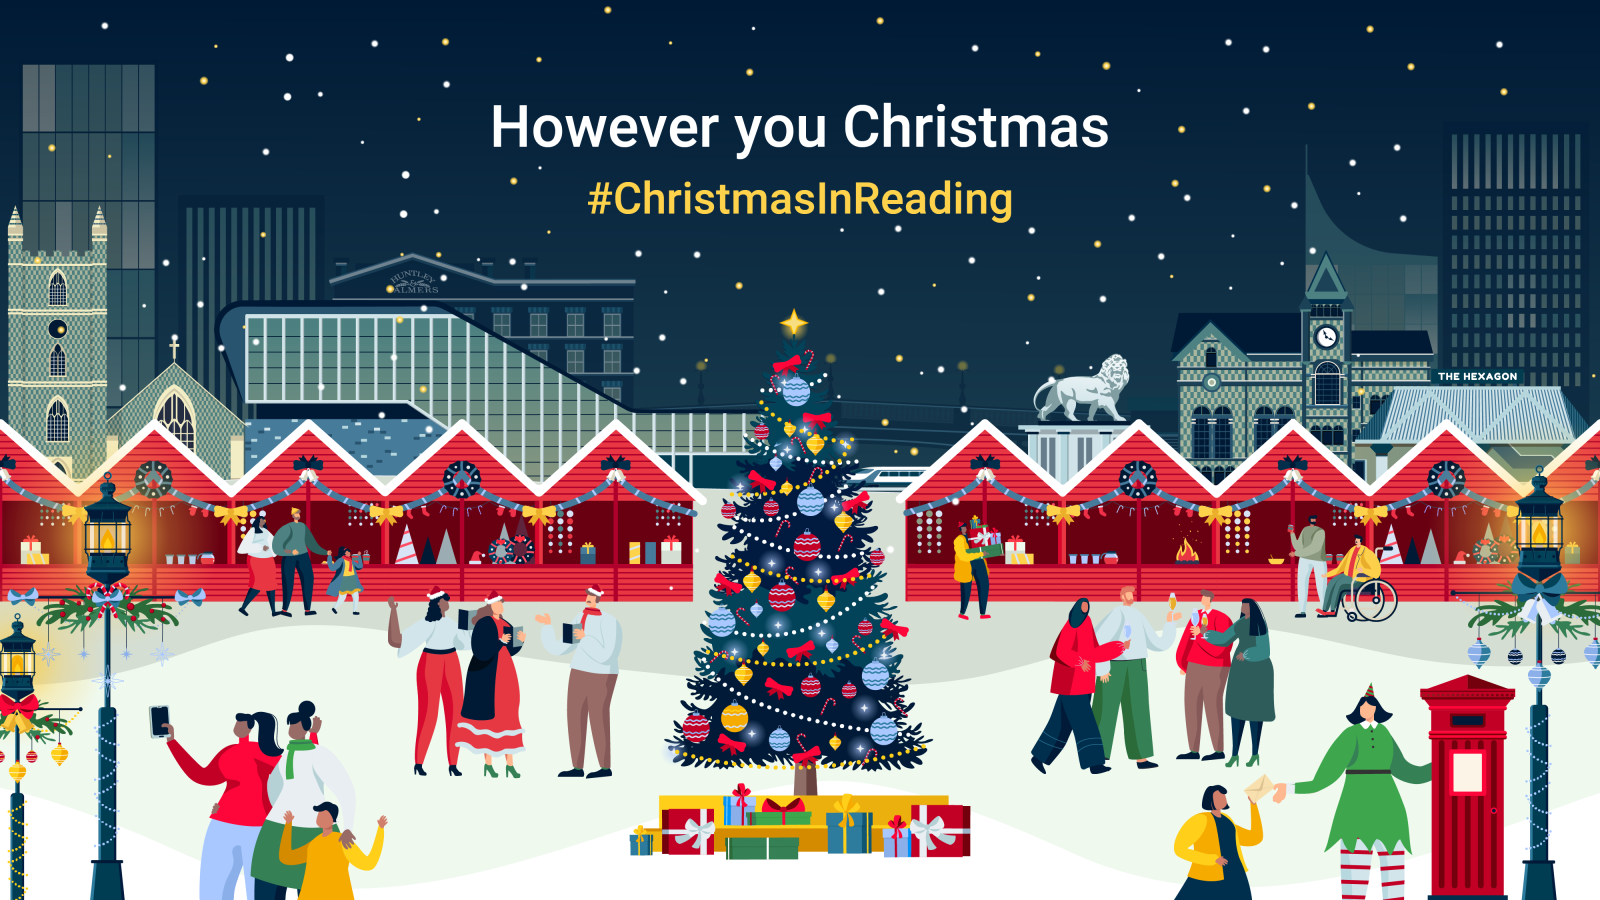 Illustrated Christmas scene showing Reading at Christmas time